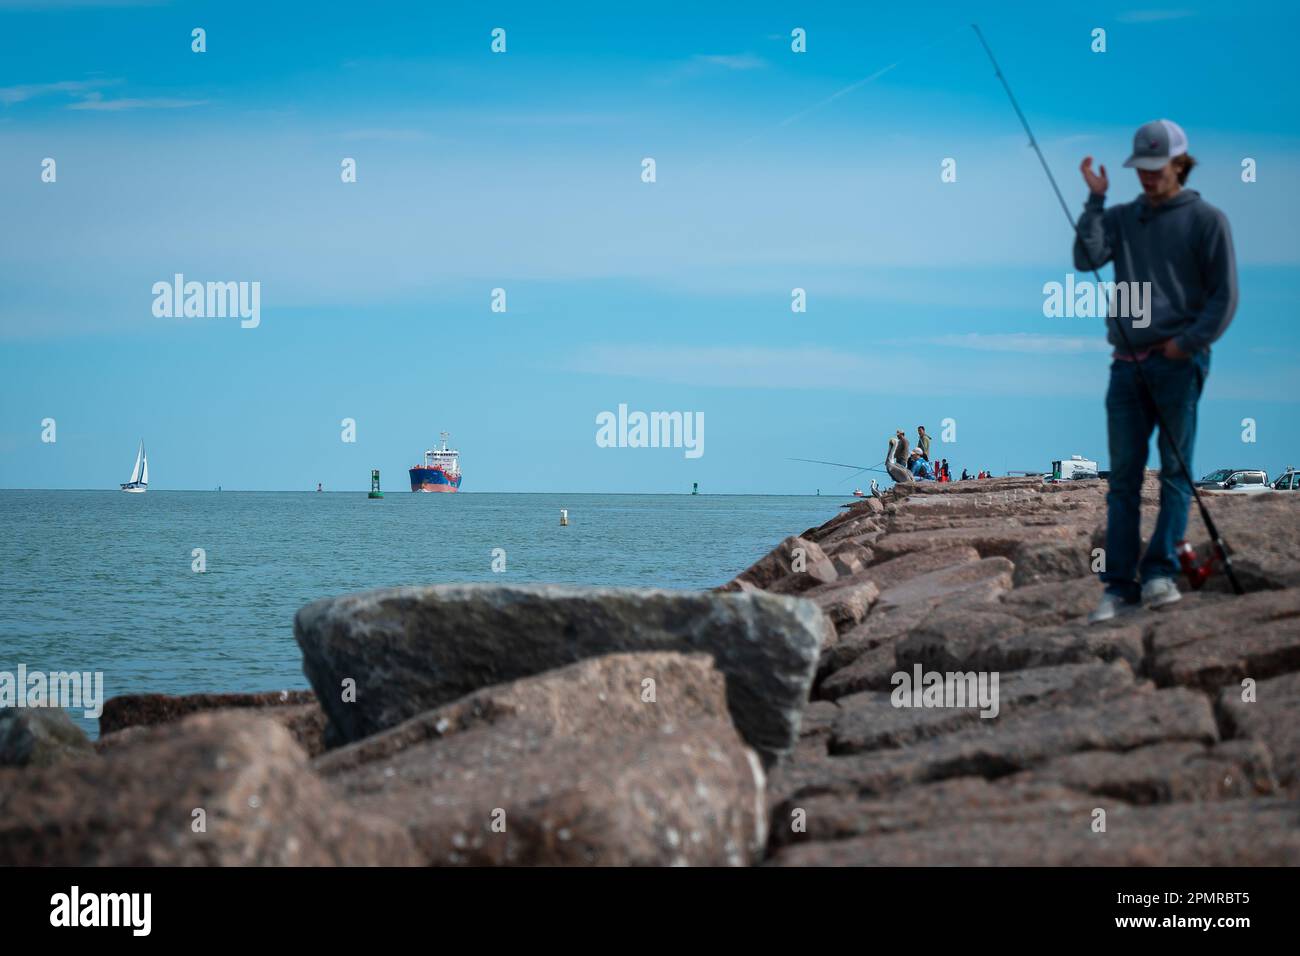 PORT ARANSAS, TX - 12 FEB 2023: The South Jetty at the Gulf of Mexico in Port Aransas, Texas, with marine traffic and people fishing. Stock Photo